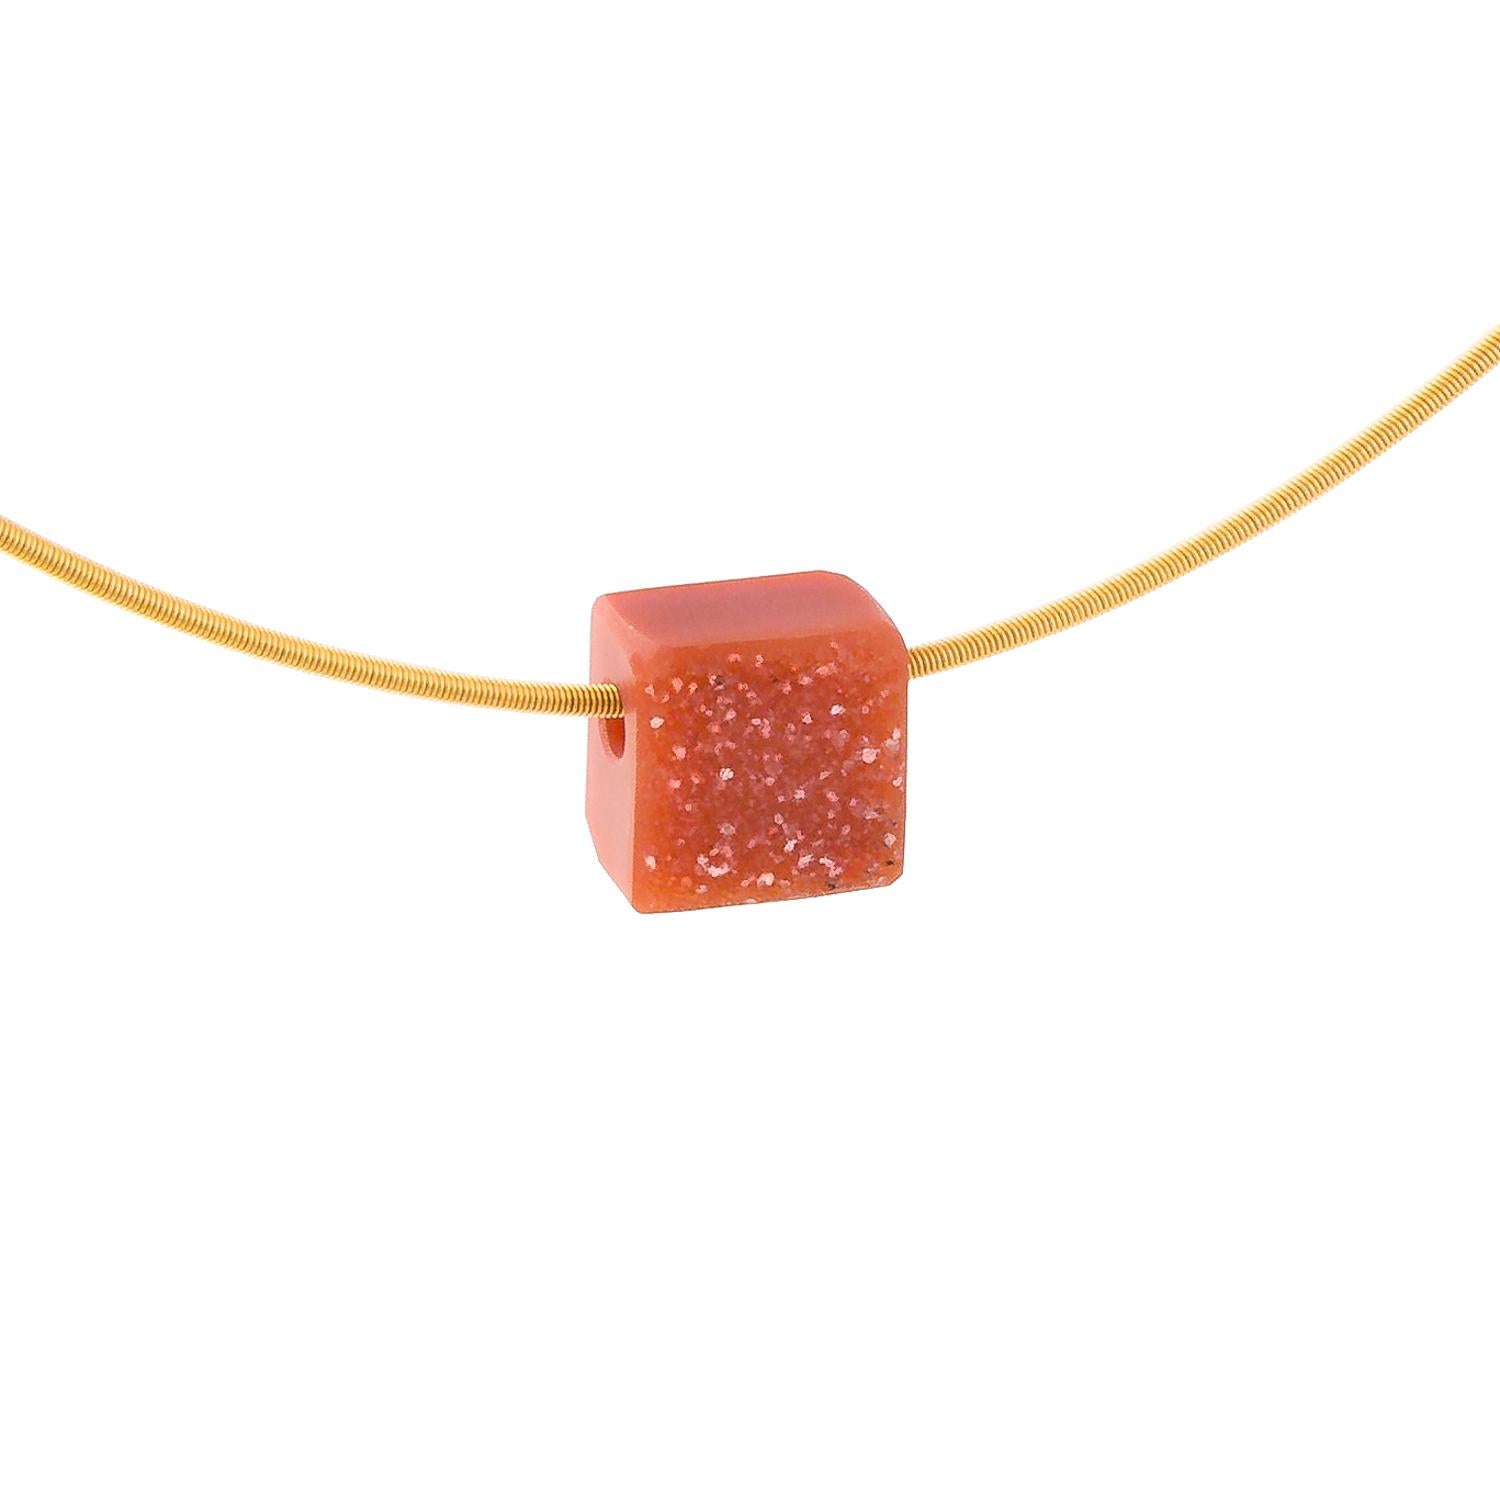 This necklace is made from a soft-orange Carnelian Drusy carved into a square shape and hung on an 18 Karat Yellow Gold circular necklace. This is quite an opaque specimen of Carnelian. A contemporary piece: simple, uncluttered and